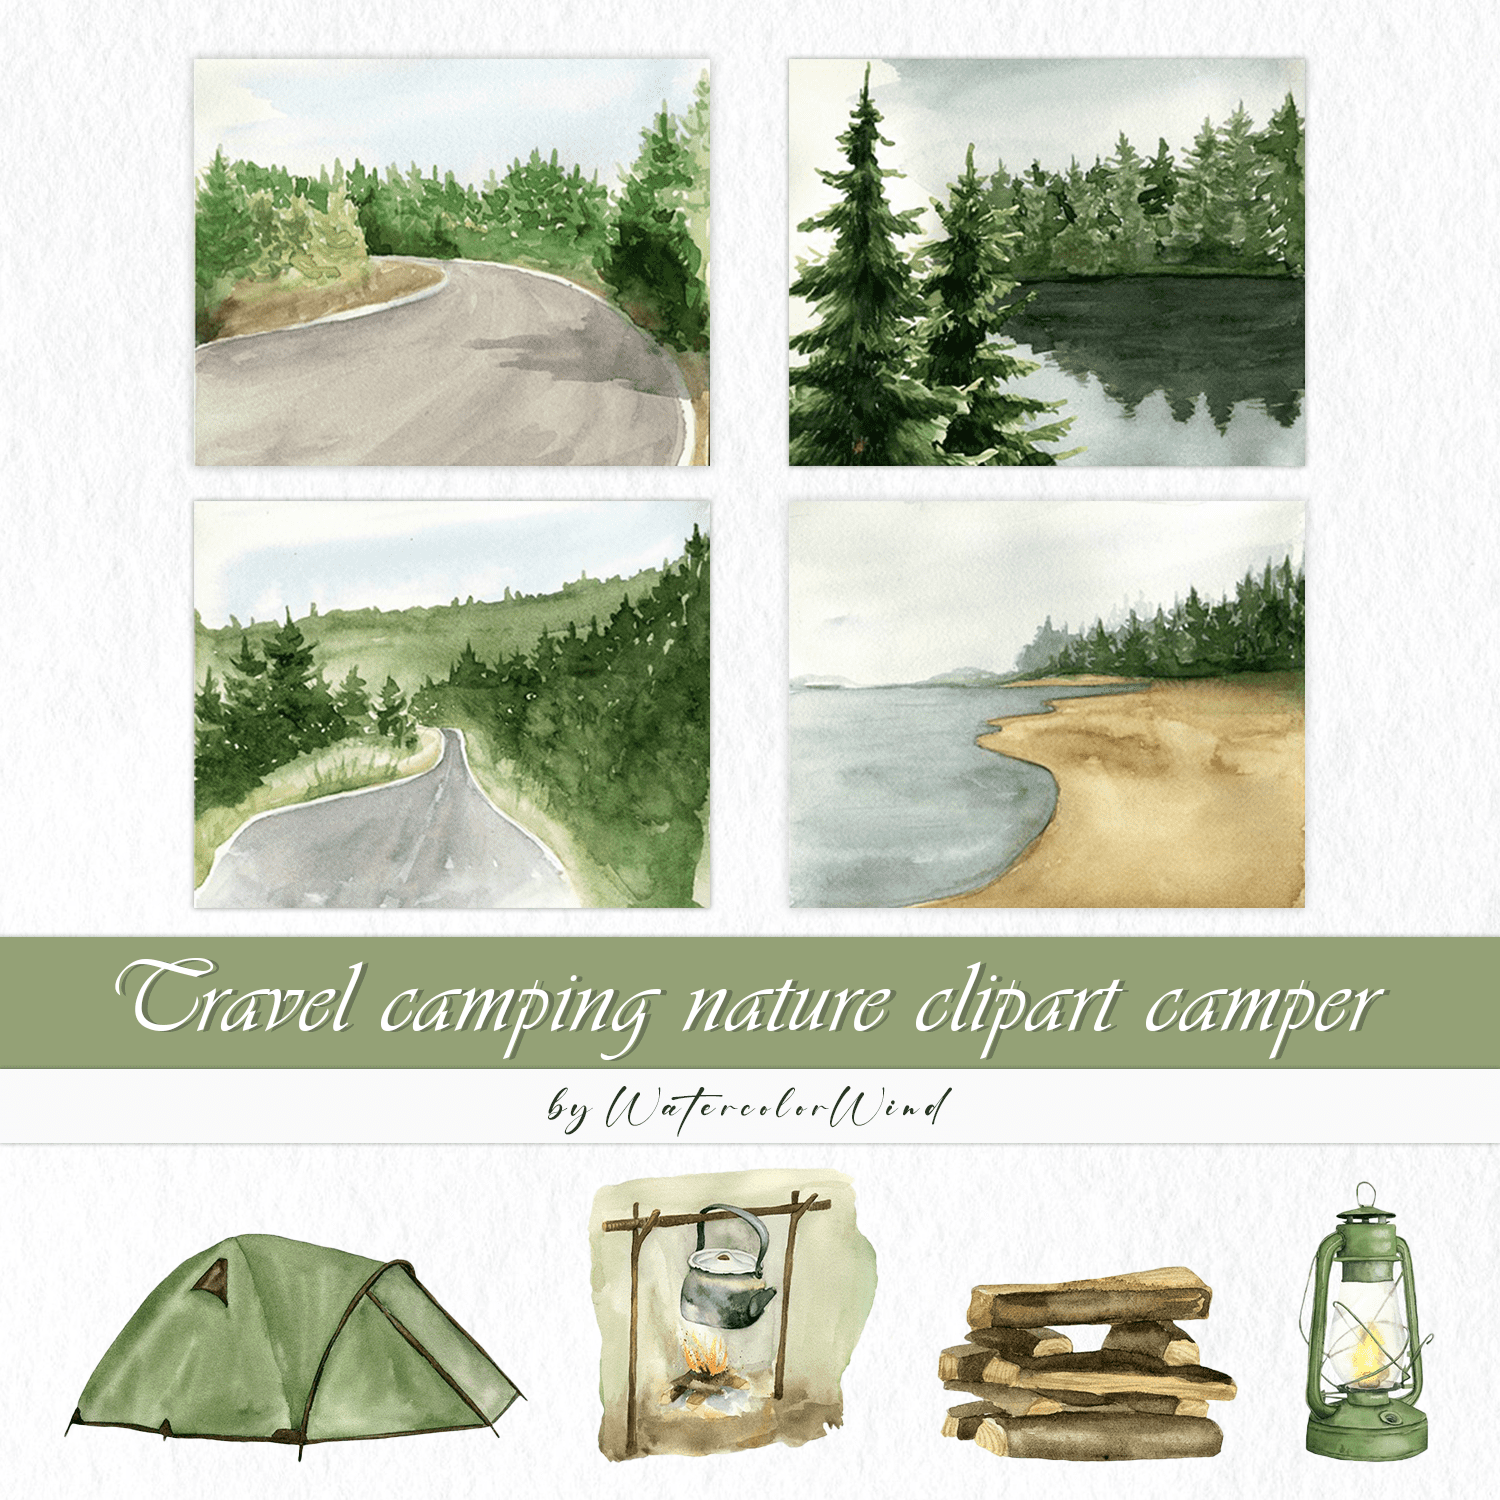 Travel camping nature clipart camper cover.